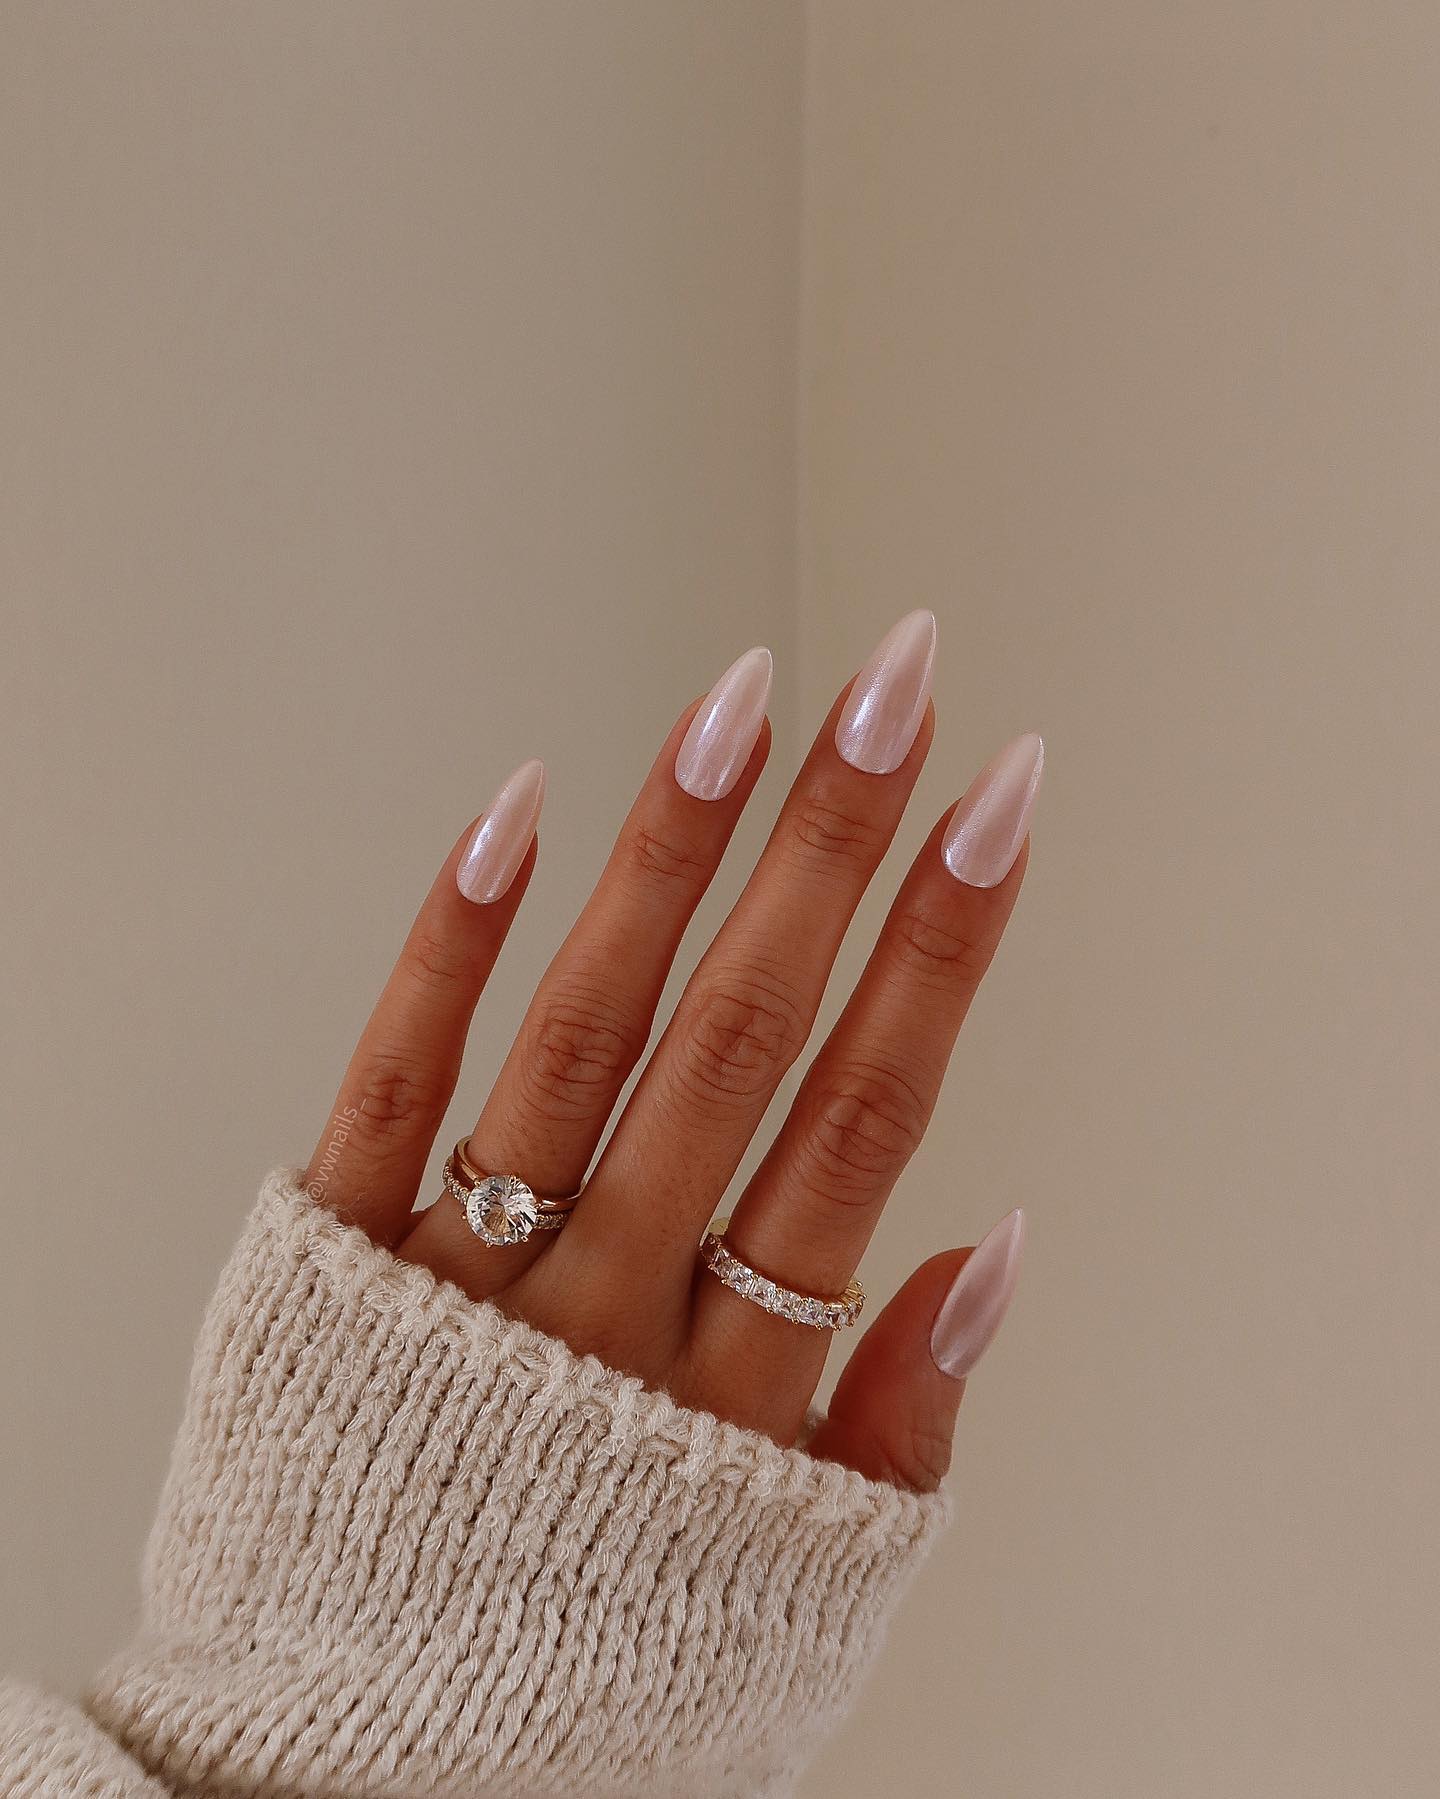 Just look at this stunning combo of the nail polish and rings. A plain but super-chic look is easy to achieve like this.